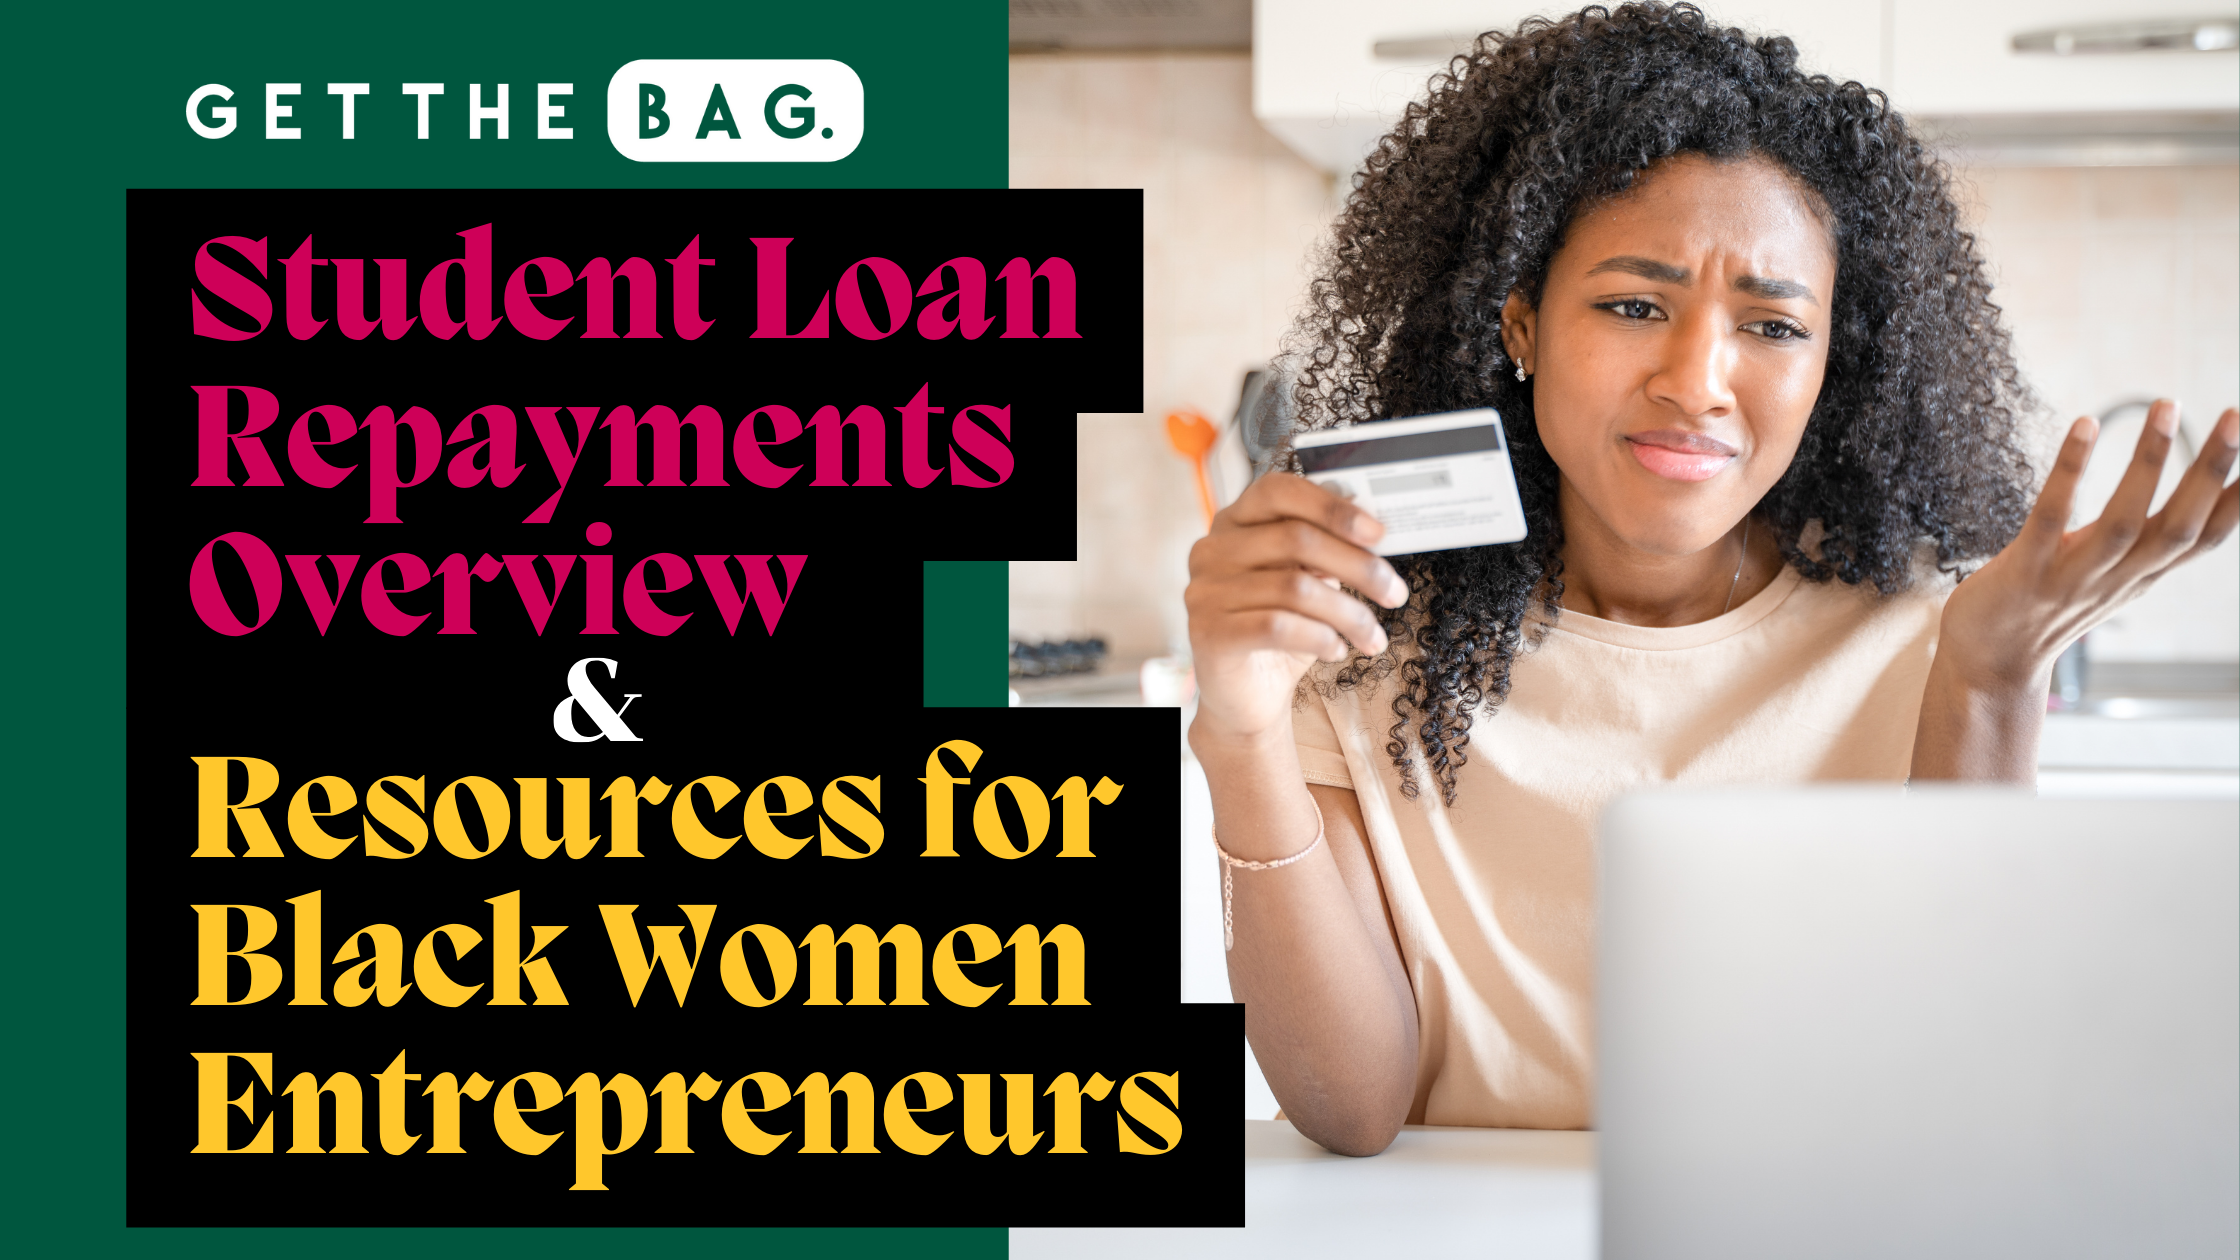 Student Loan Repayments Overview and Resources for Black Women Entrepreneurs